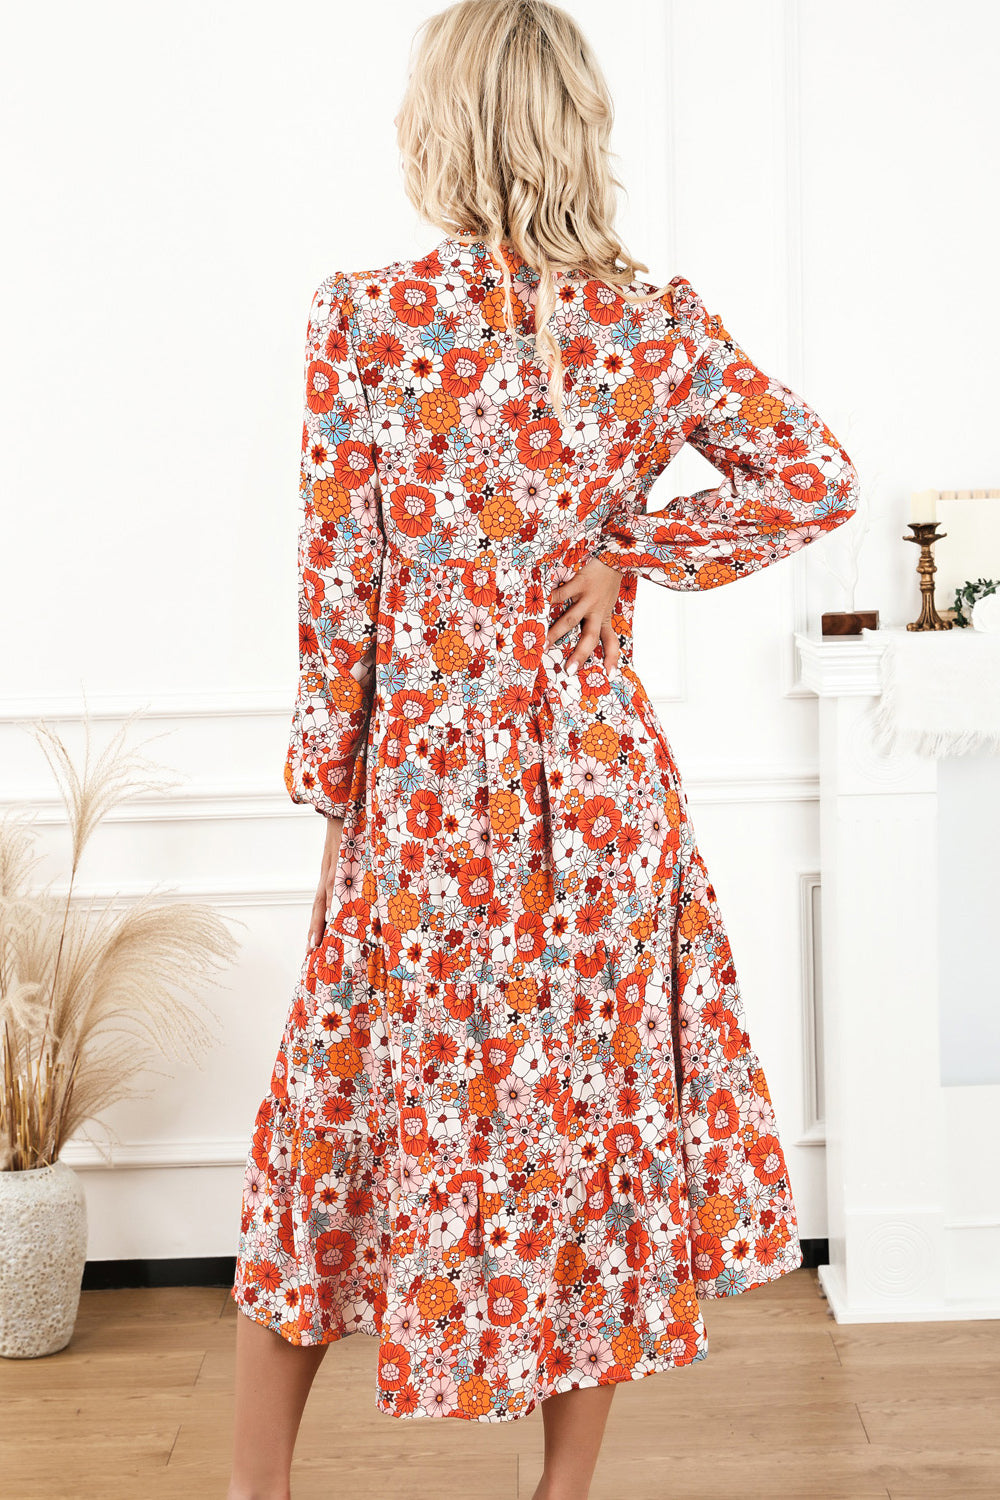 Elegant Floral Long Sleeve Dress: Perfect for Summer Beach Weddings and Party Attire